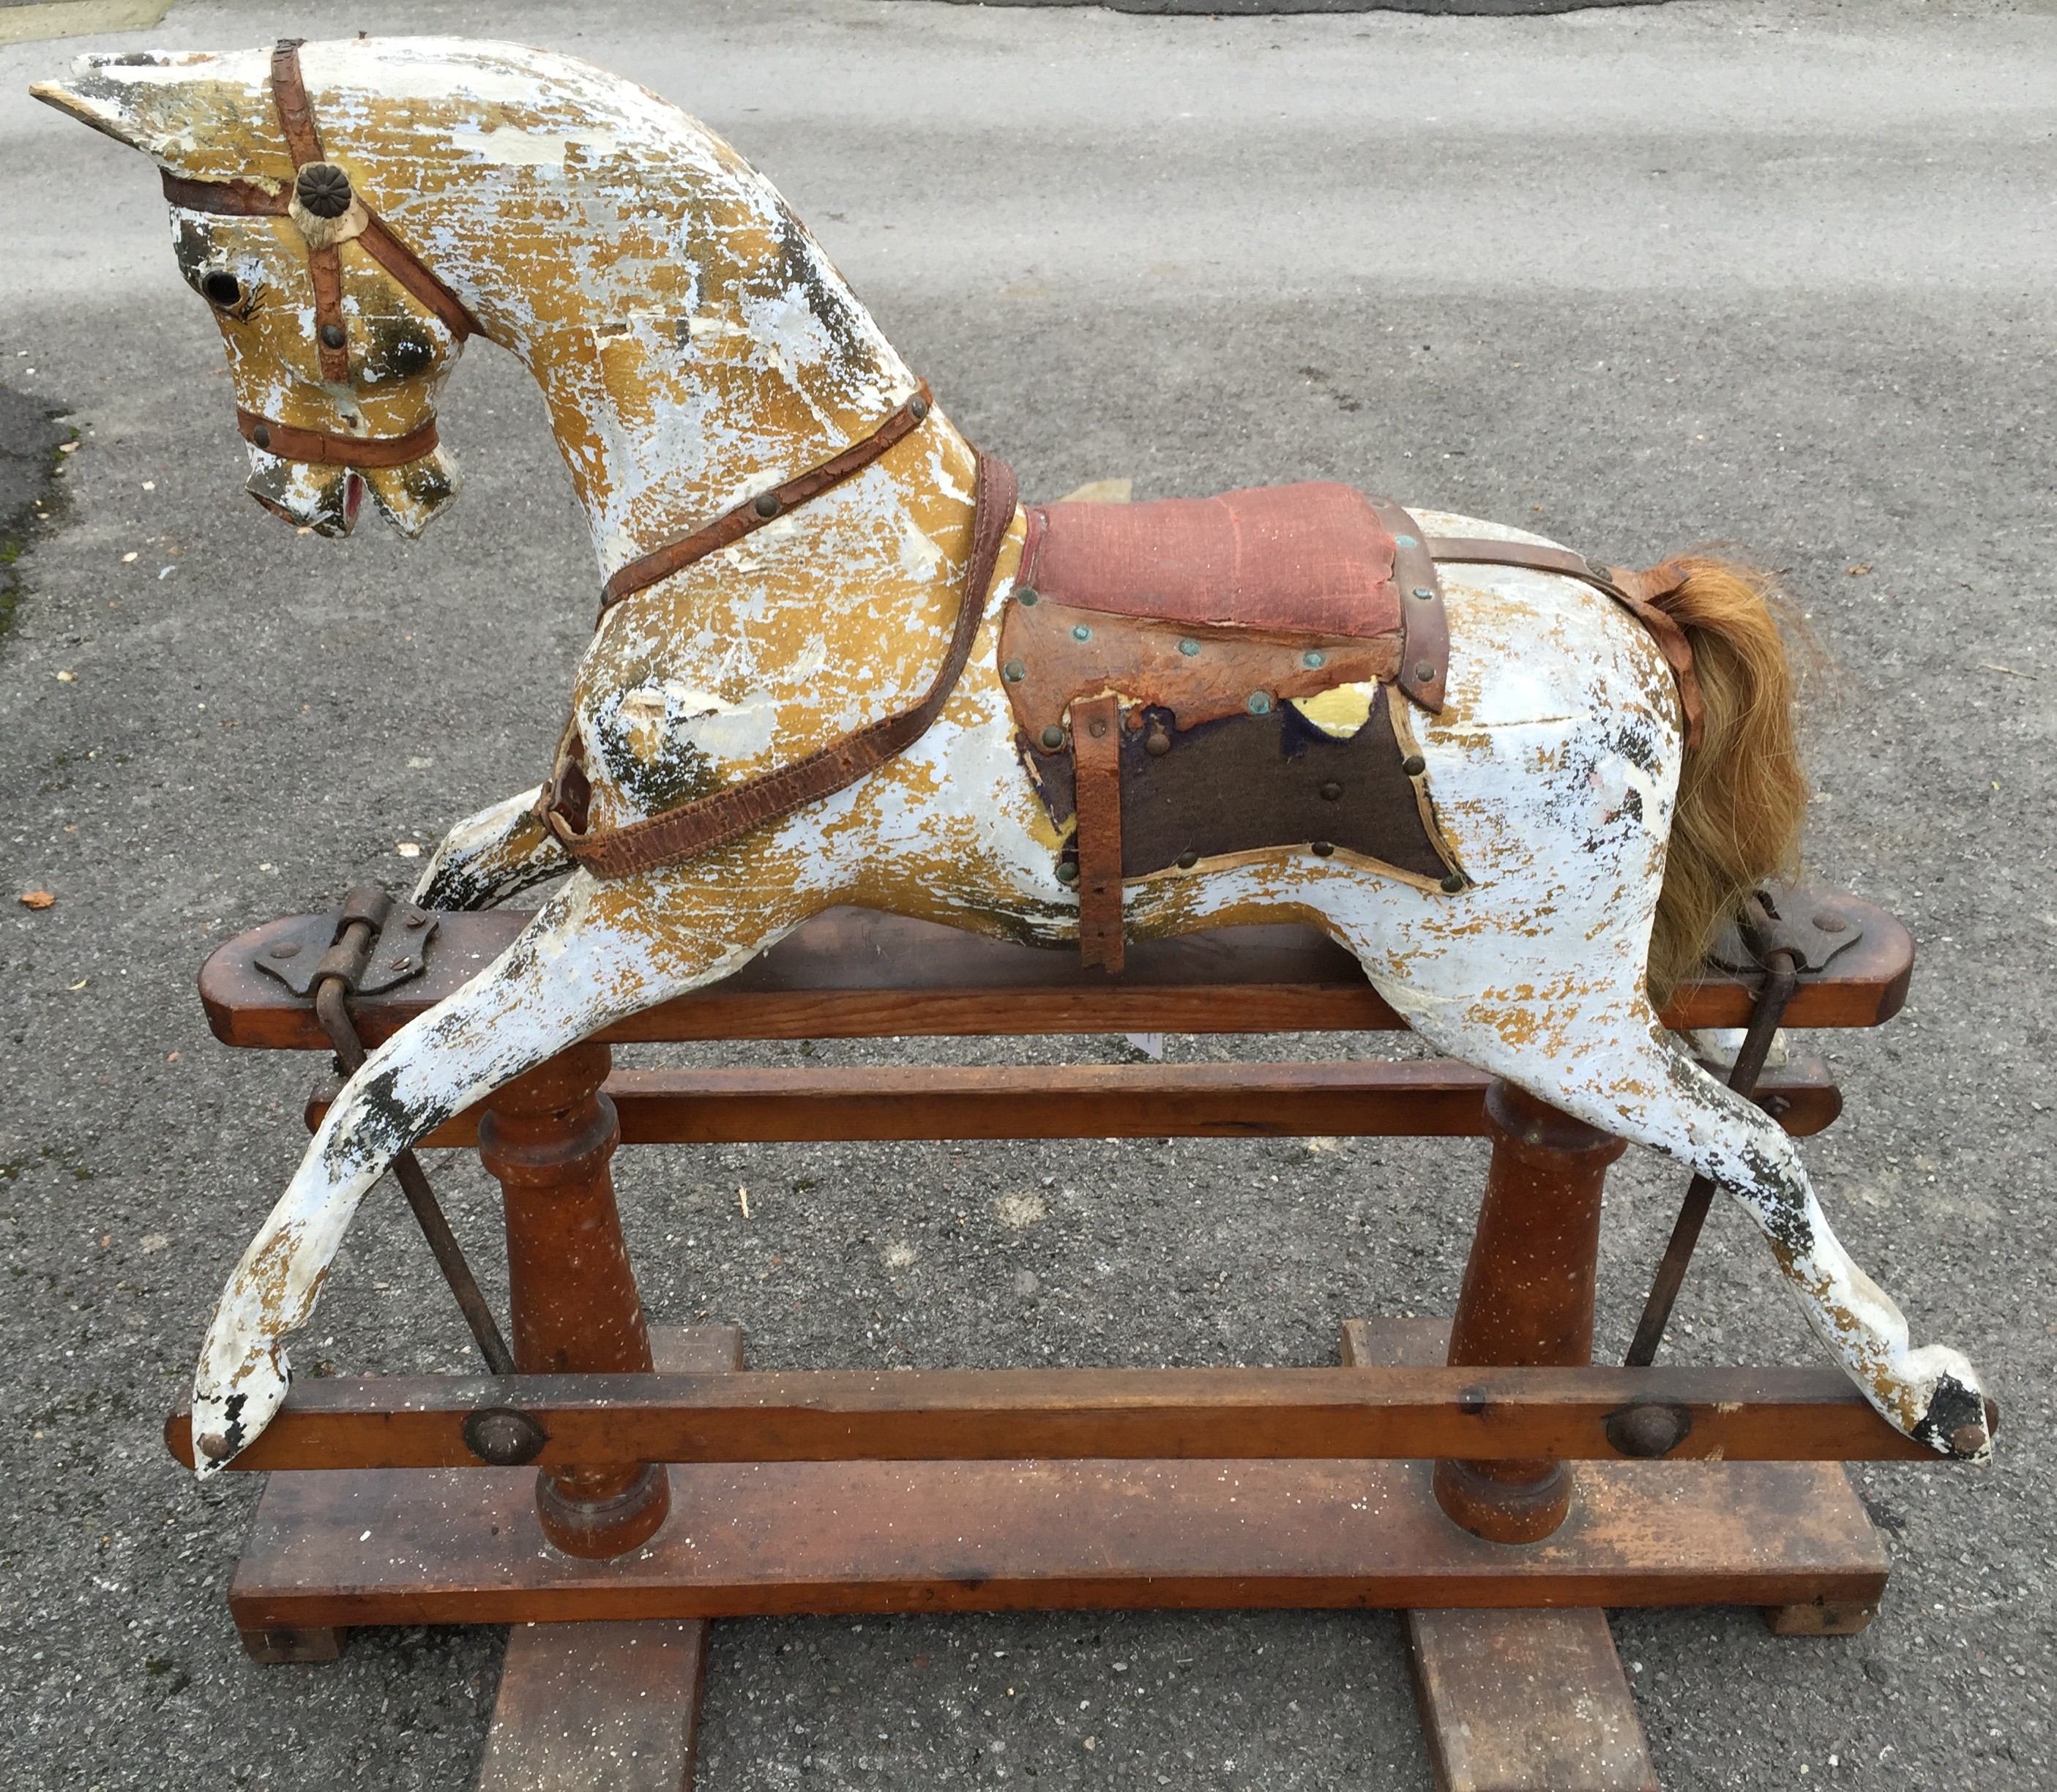 Early 20th Century G & J Lines (London) Rocking Horse ''Queenie'': dappled grey rocking horse with